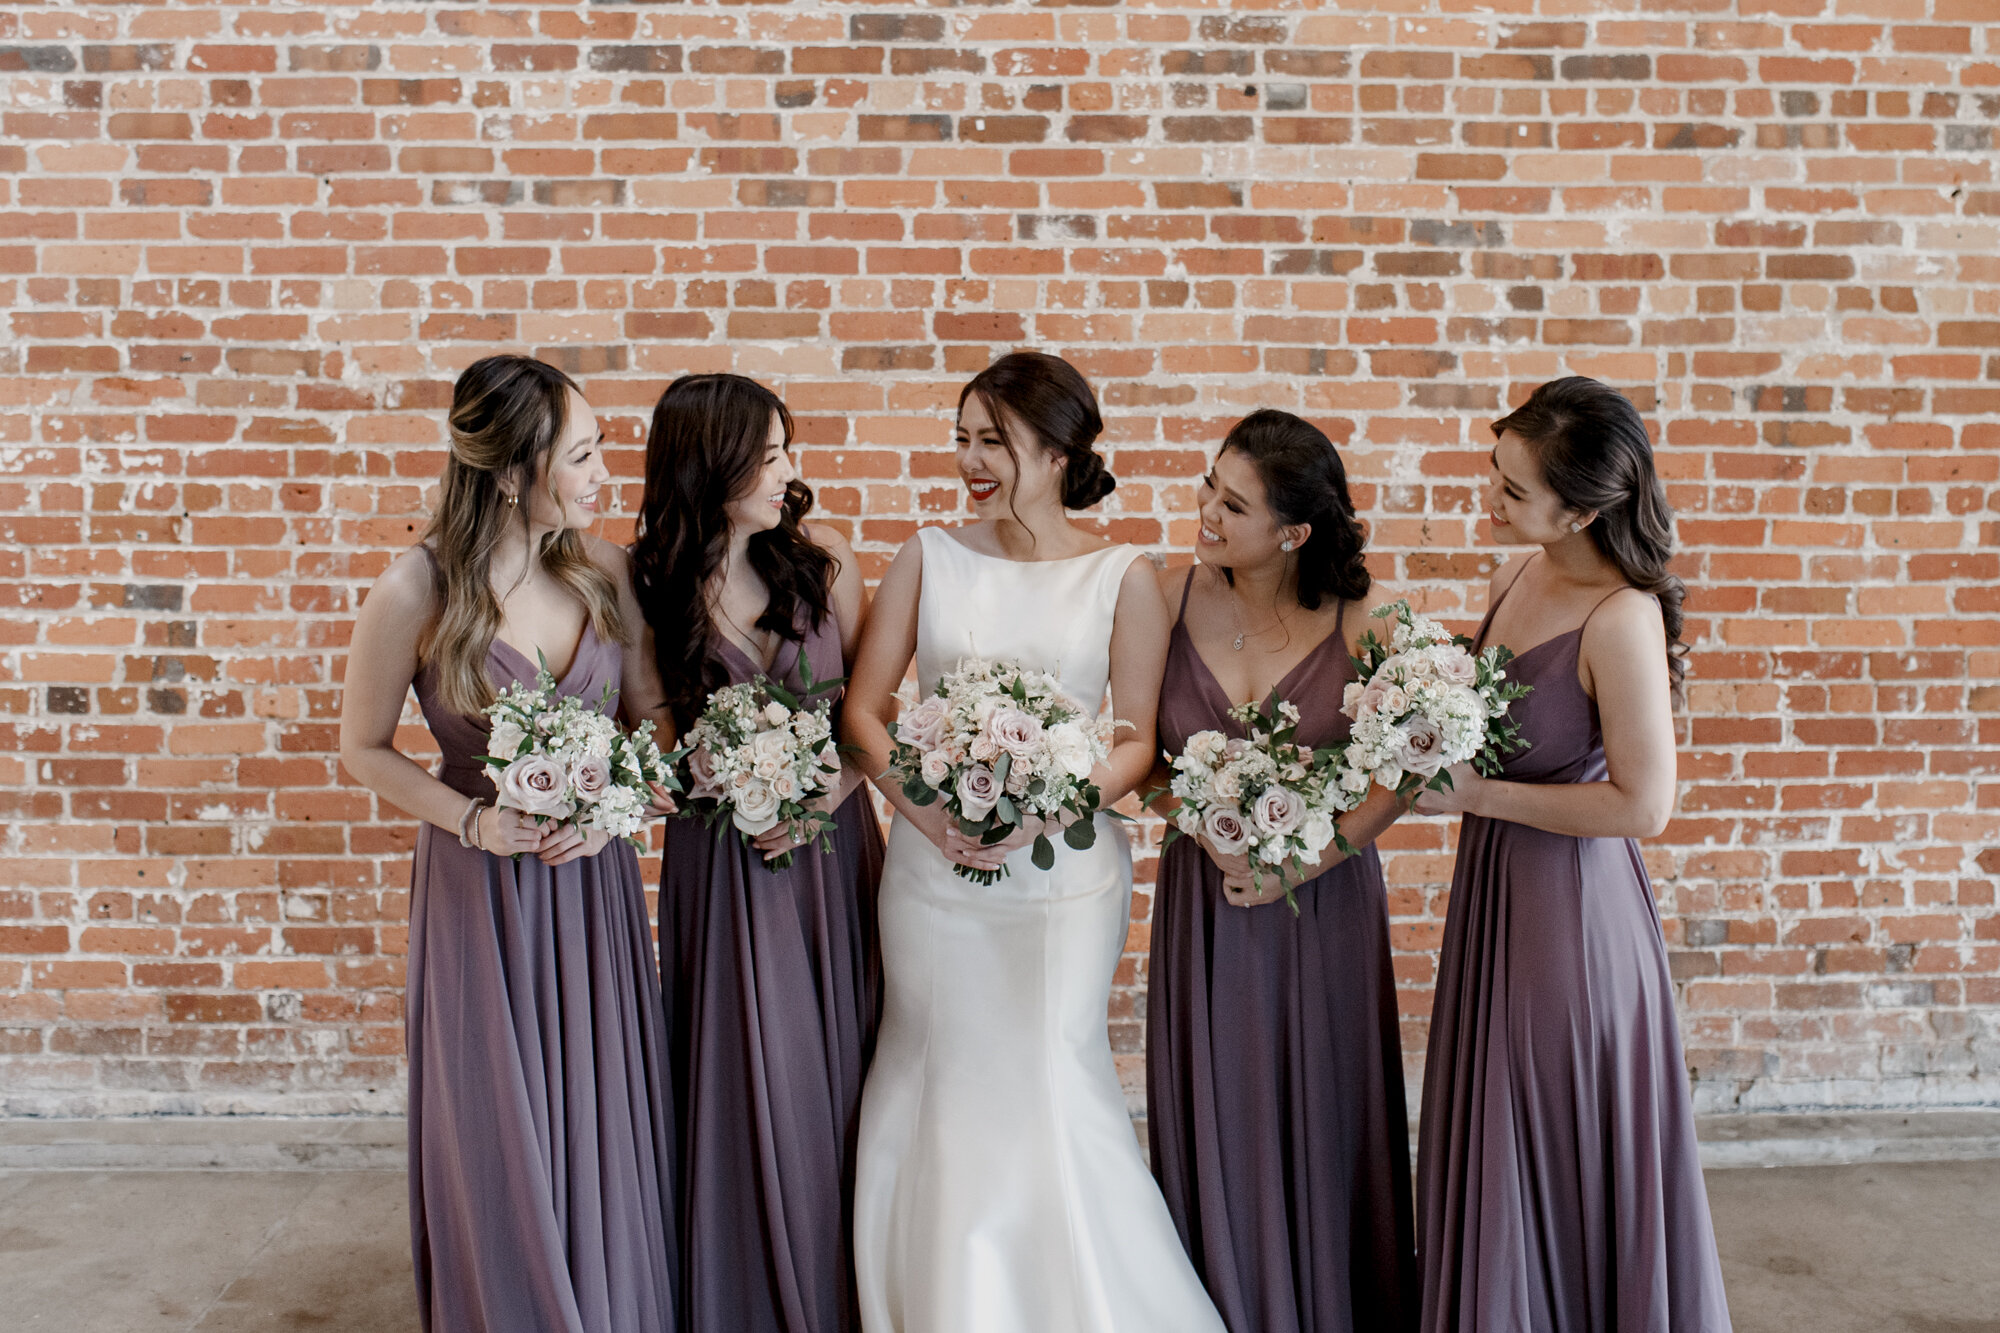 Bride and bridesmaids portraits looking at each other. Urban Elegant East Asian Wedding at Ronin 2